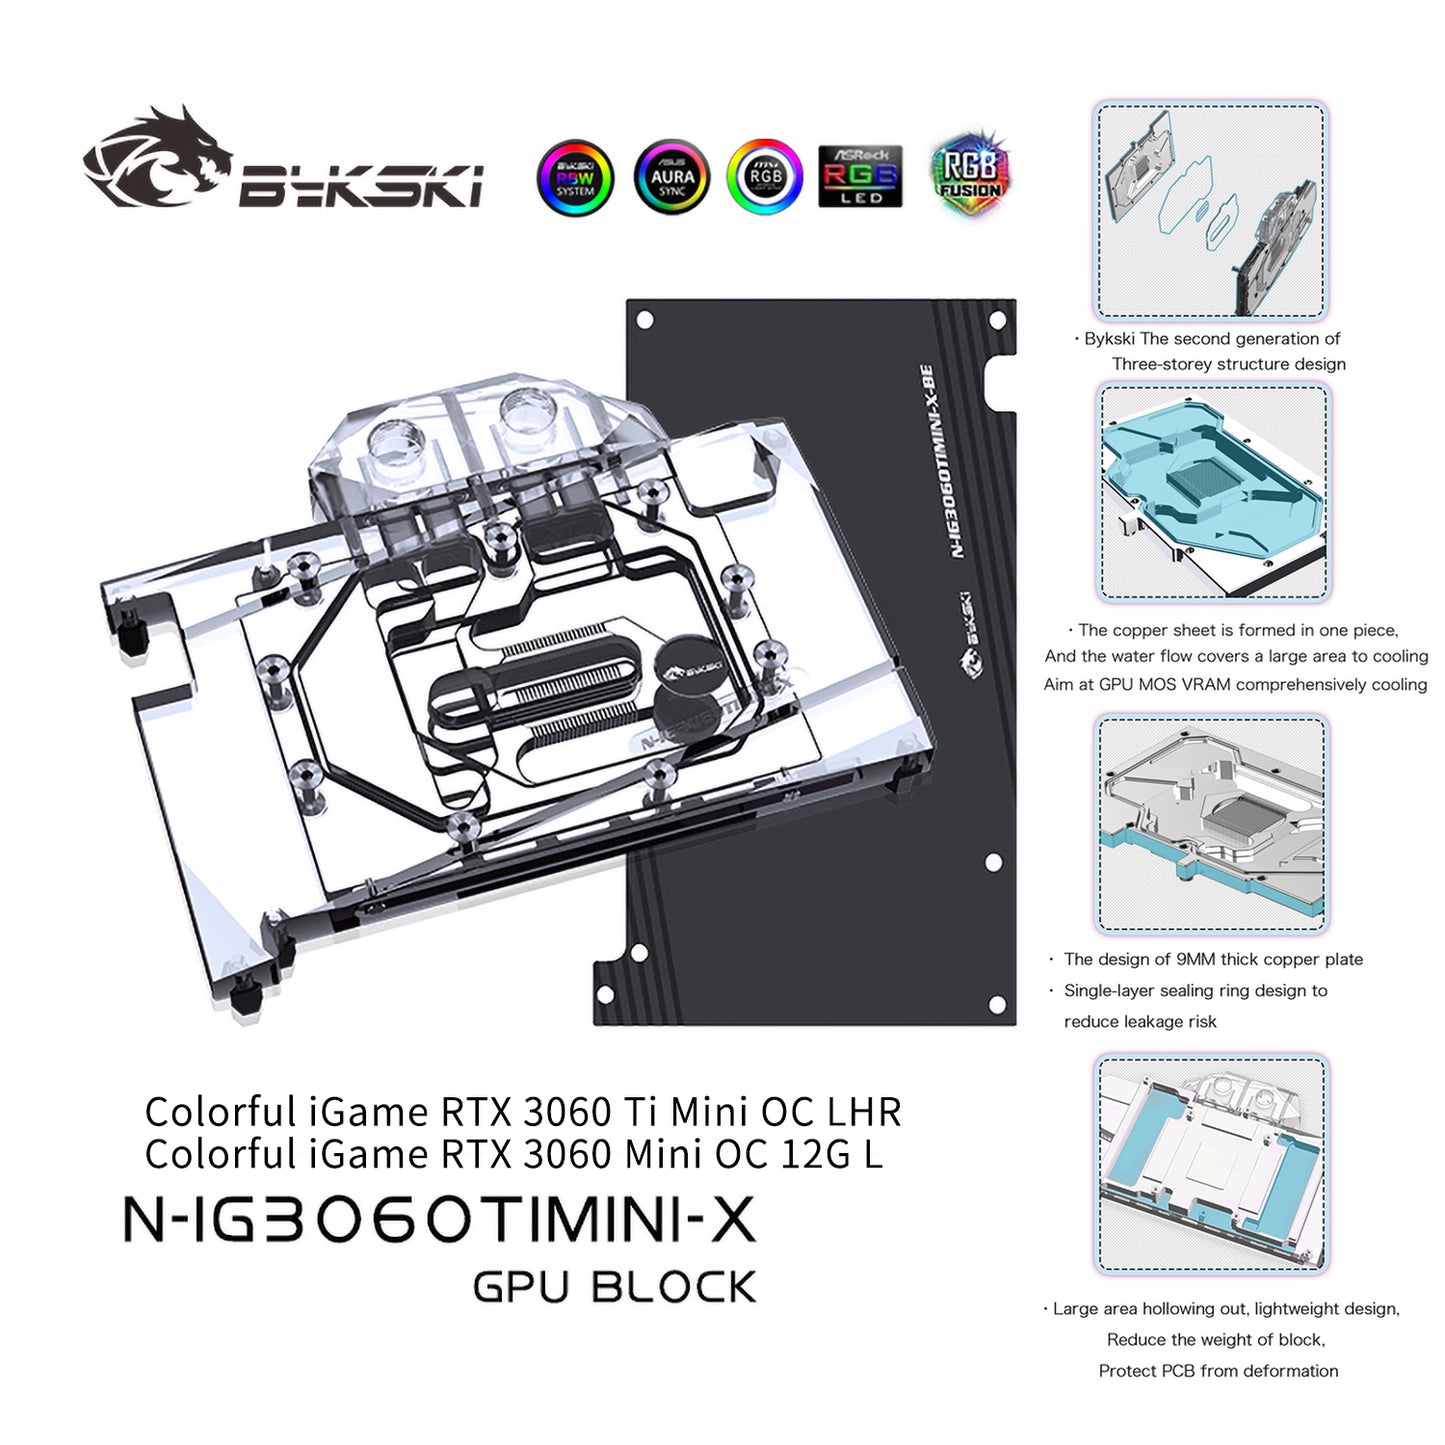 Bykski GPU Water Block For Colorful iGame RTX 3060 Ti Mini OC LHR / RTX 3060 Mini OC 12G L, Full Cover With Backplate PC Water Cooling Cooler, N-IG3060TIMINI-X